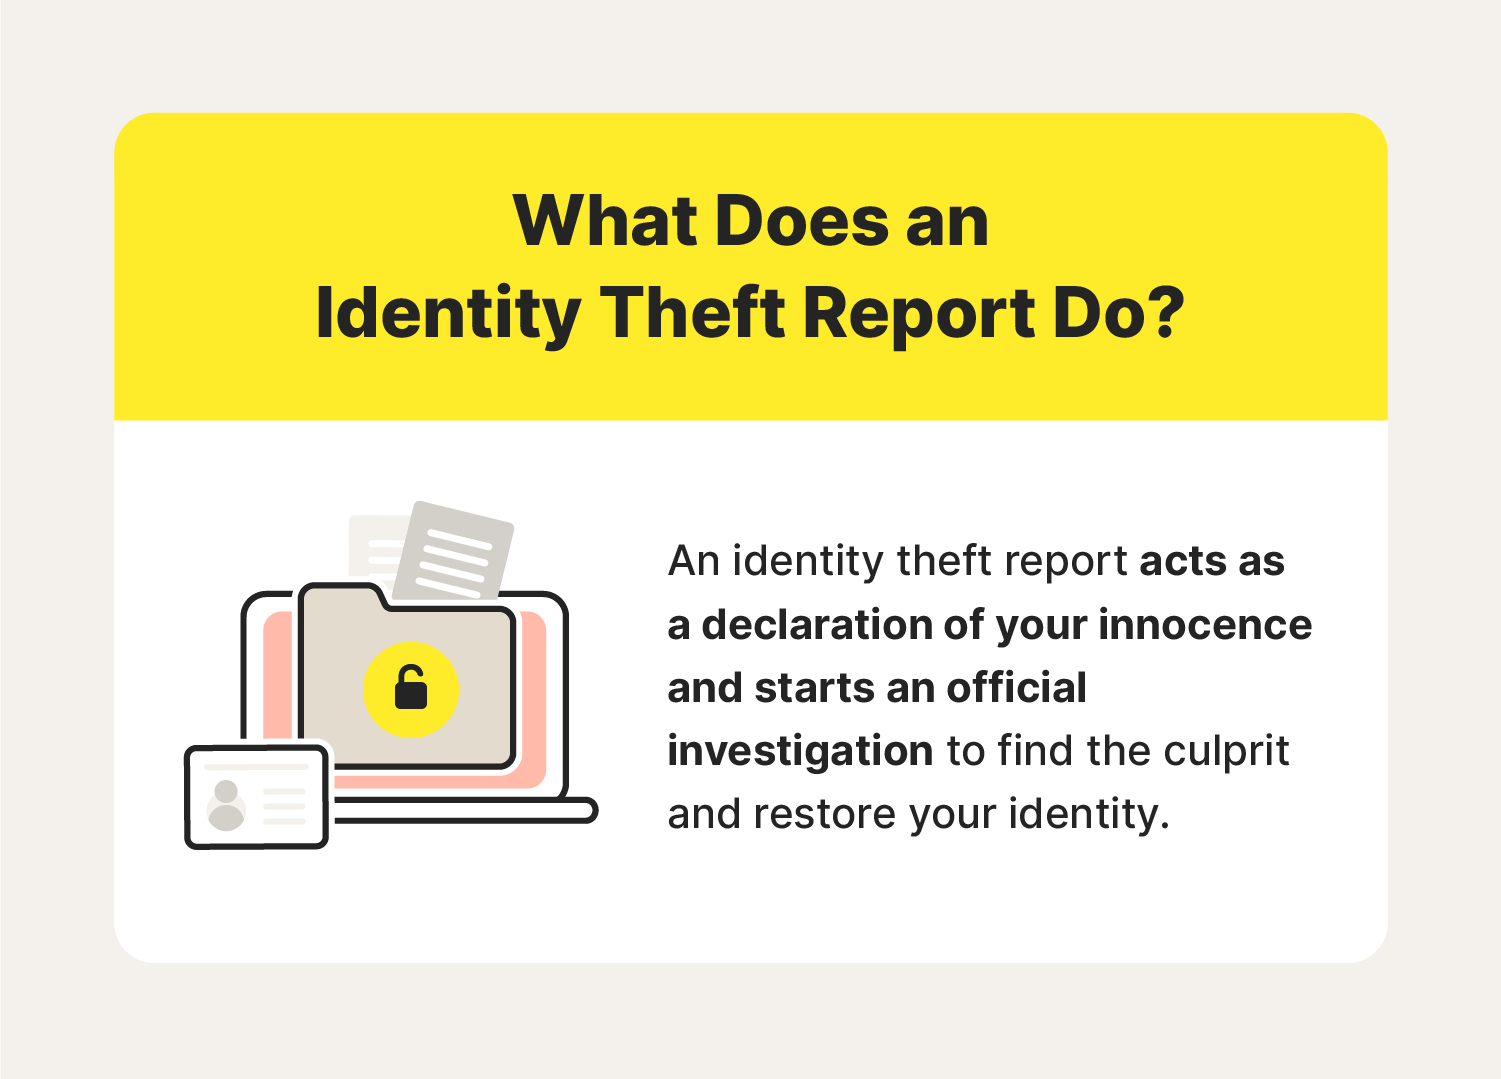 A graphic describes an identity theft report, a crucial part of learning how to report identity theft